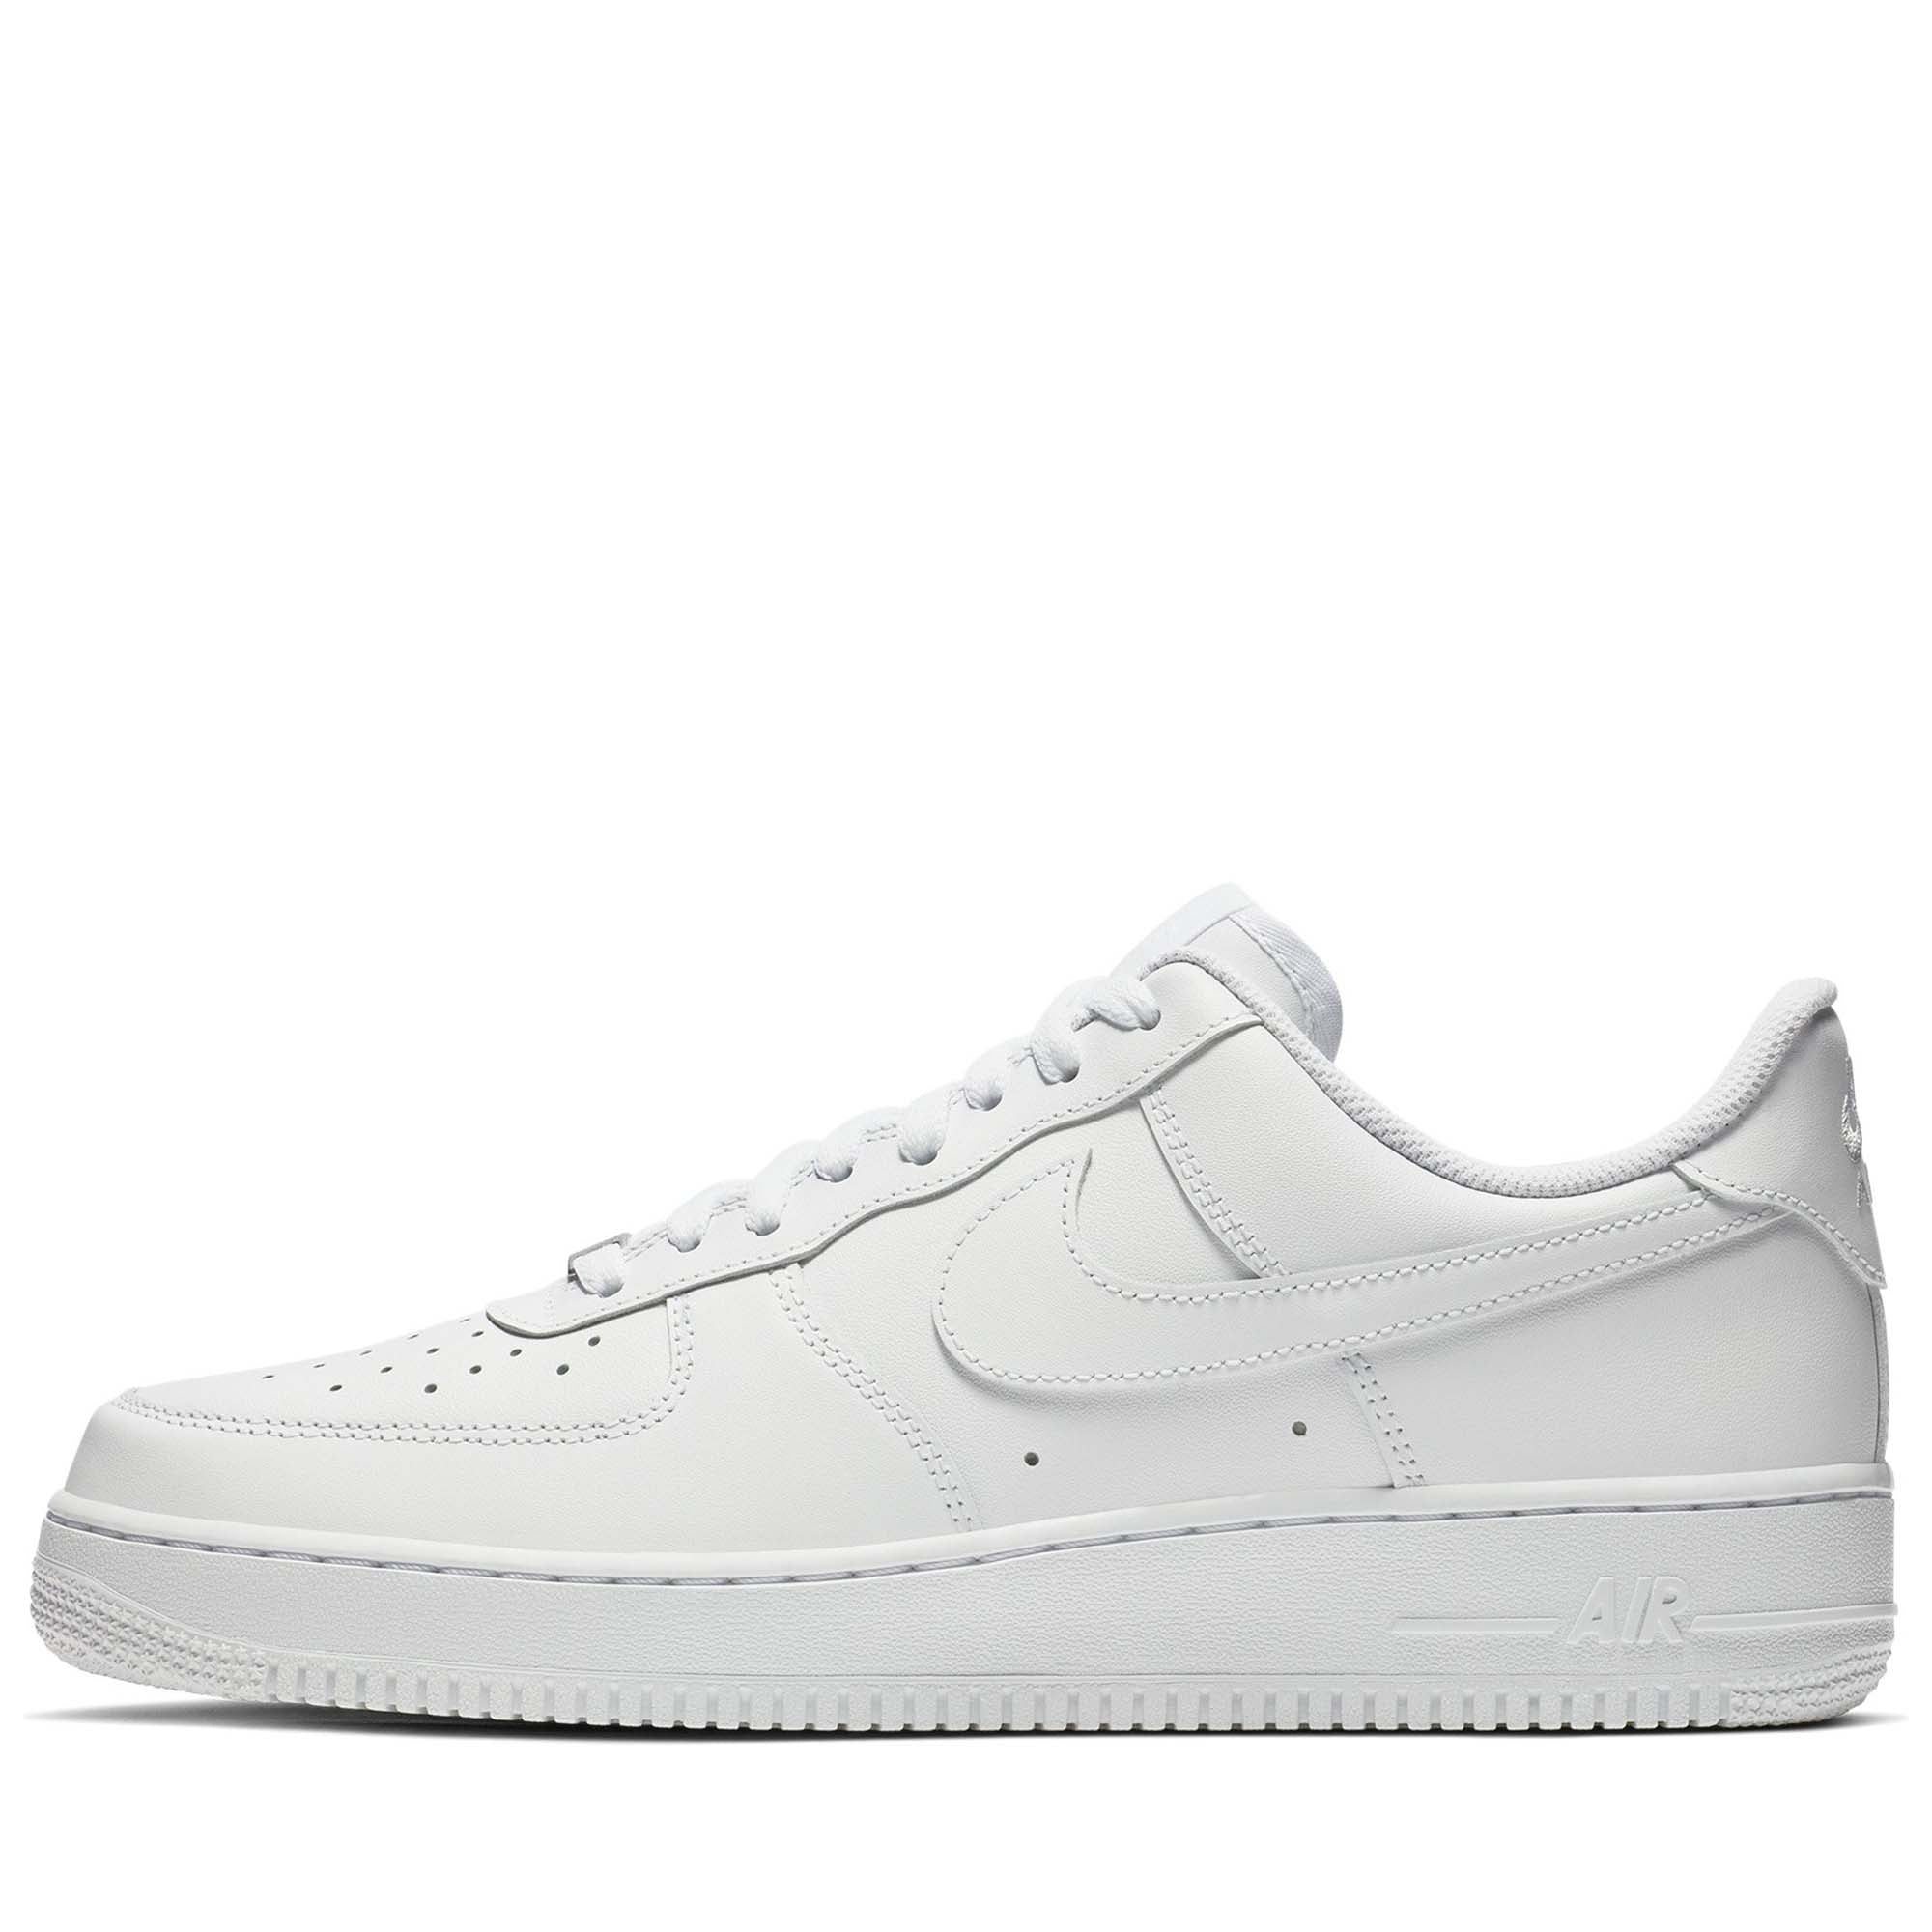 Image of Nike Air Force 1 '07 - White/White